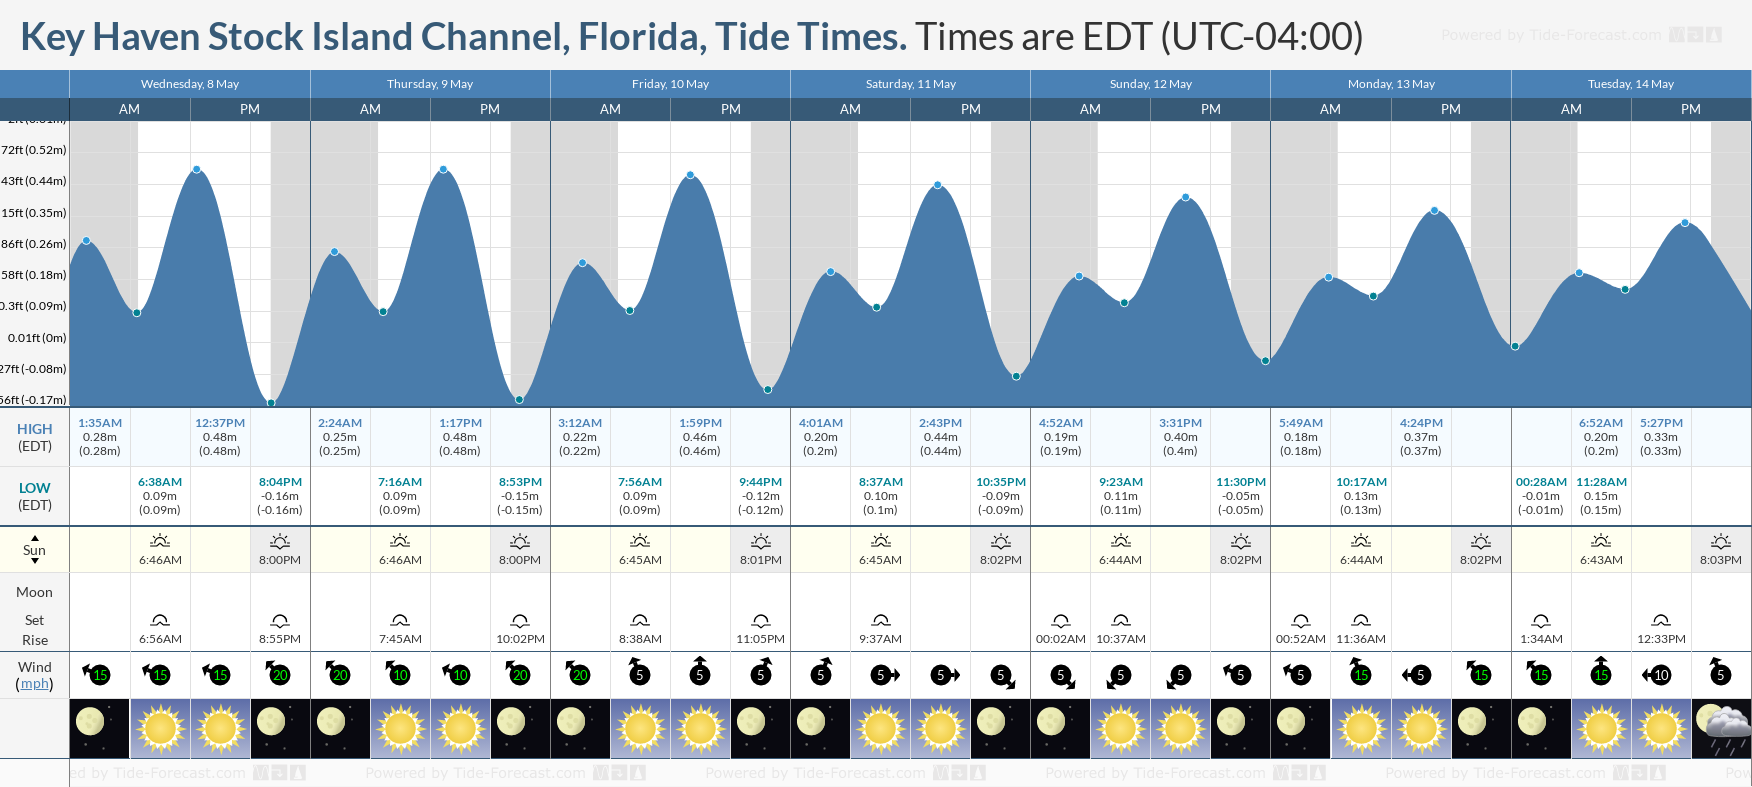 Key Haven Stock Island Channel, Florida Tide Chart including high and low tide times for the next 7 days